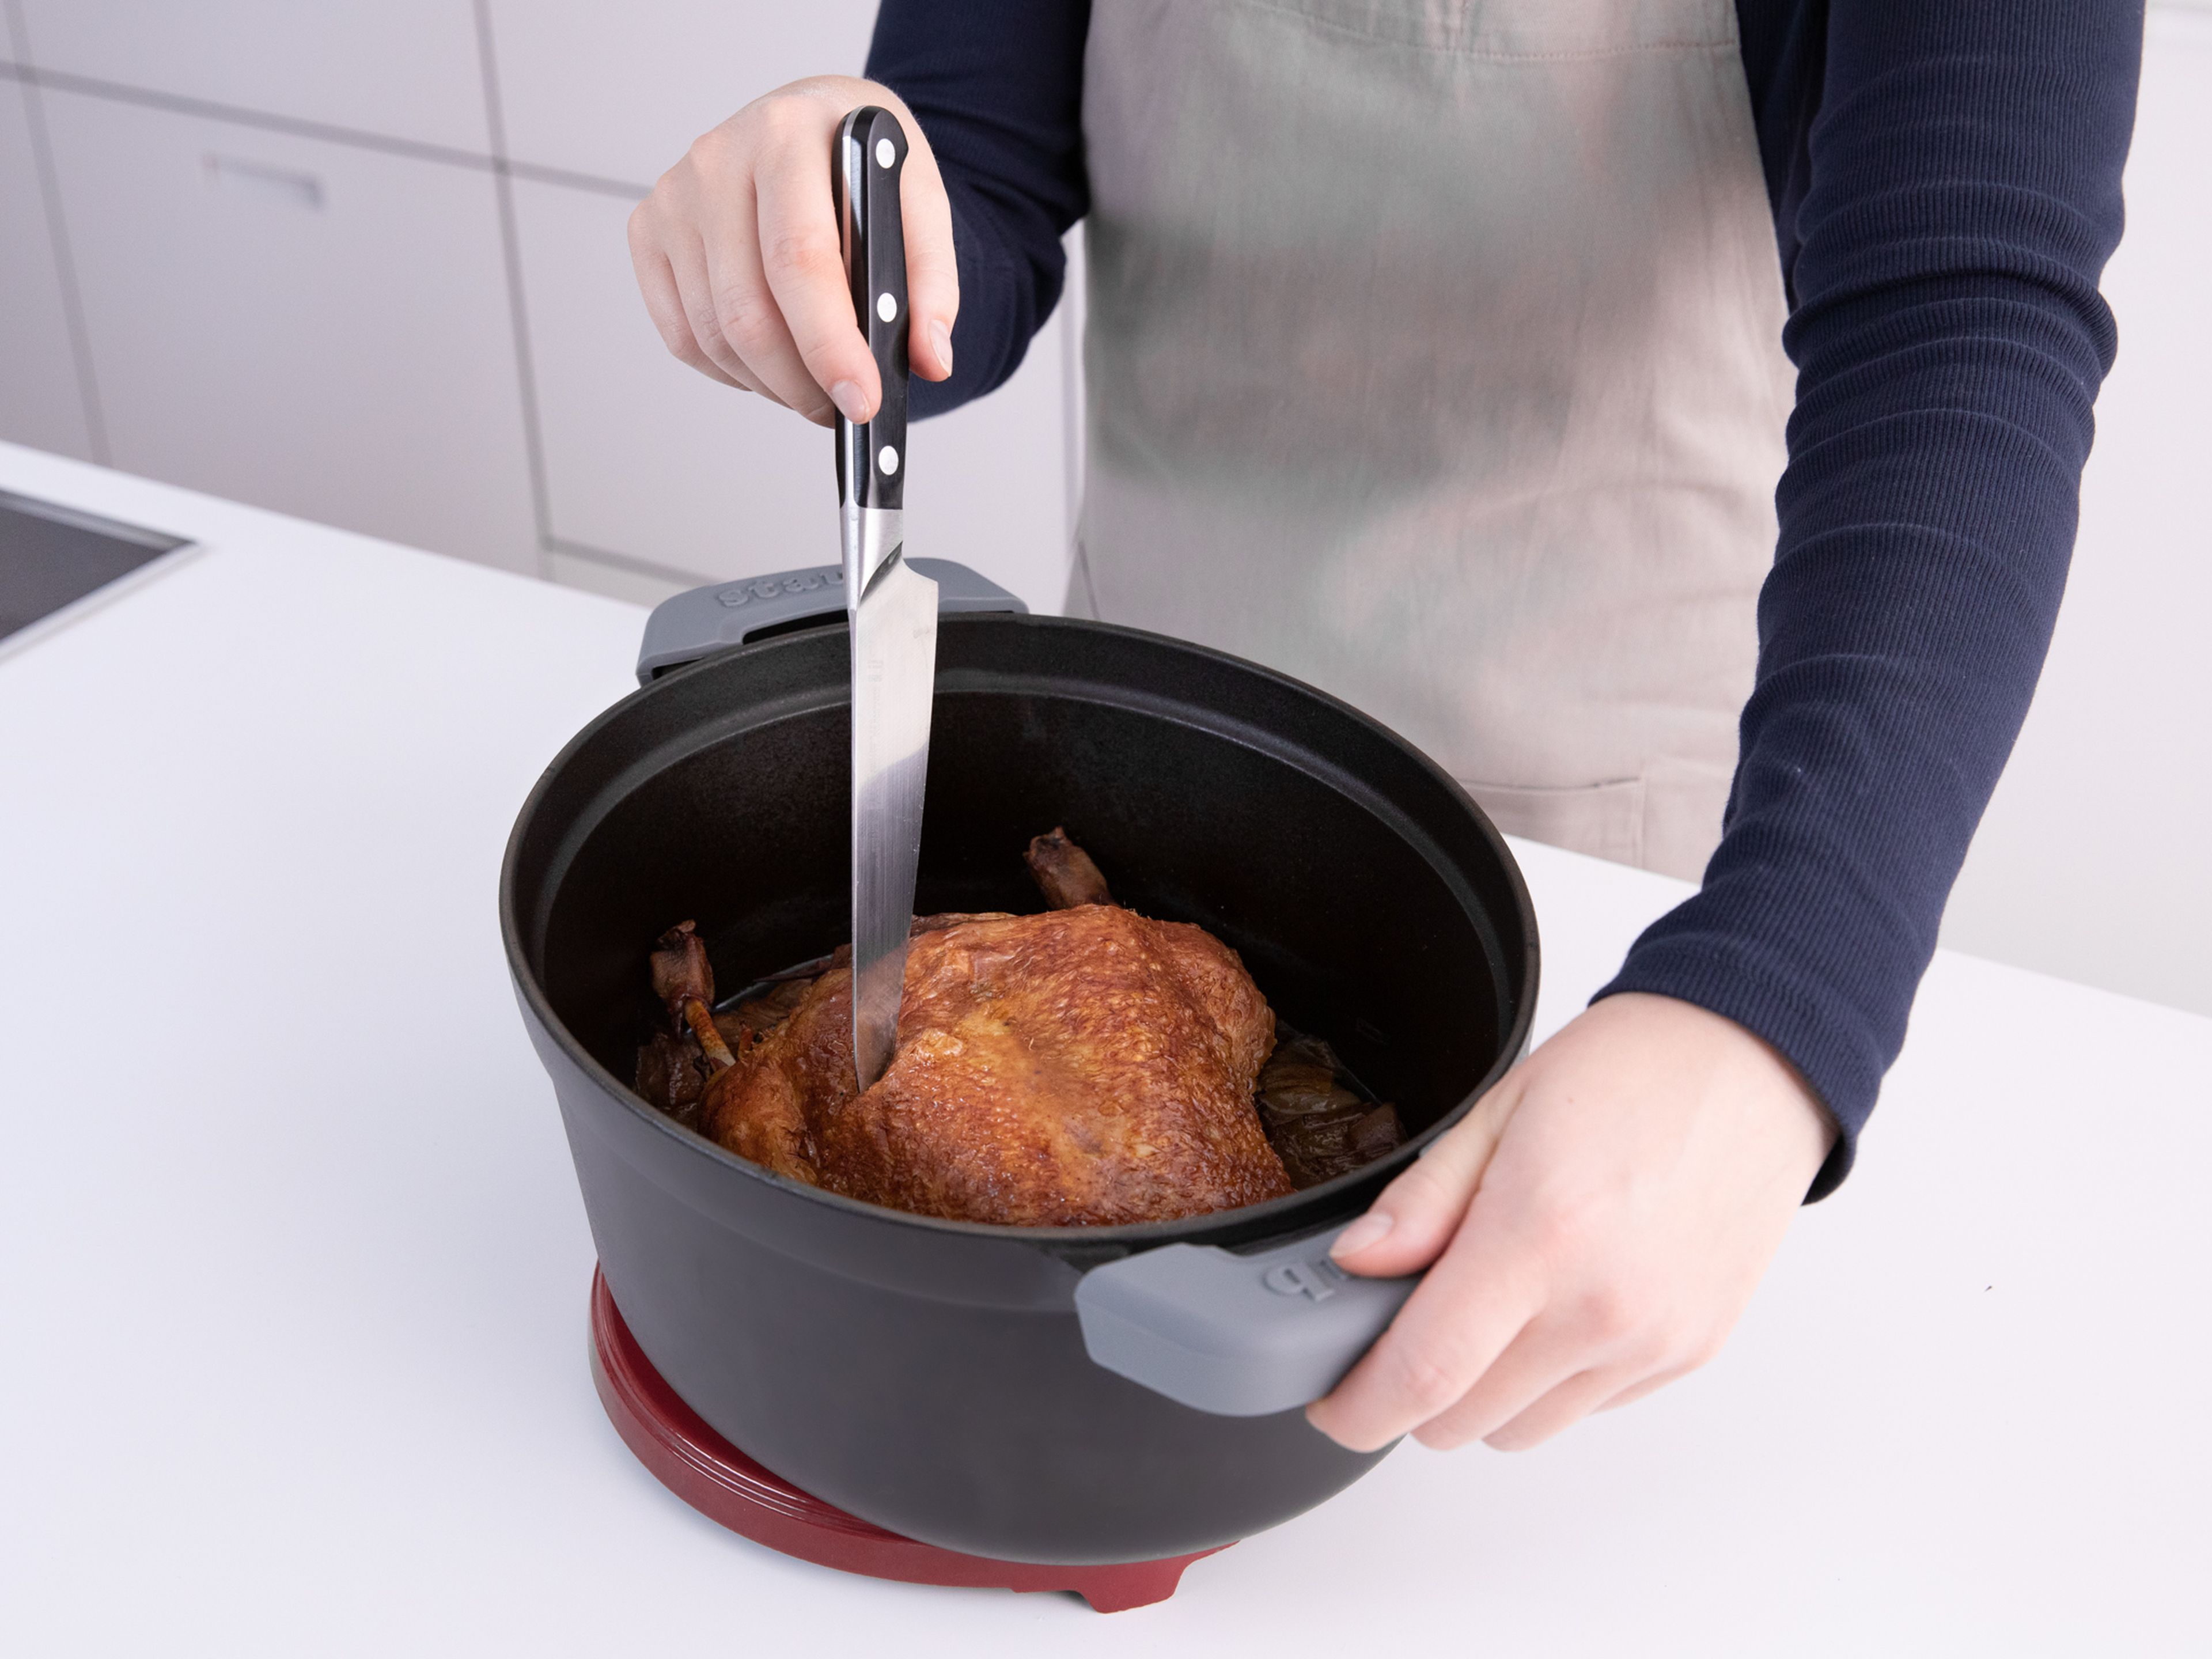 There are two ways to test whether a roast chicken, duck, or turkey is done without a food thermometer. For the first method, pull on the drumsticks. If they come loose or off rather easily, the bird is cooked. For the second method, prick a thick part of the bird with a sharp knife. When the juice that runs out is clear, it’s done.